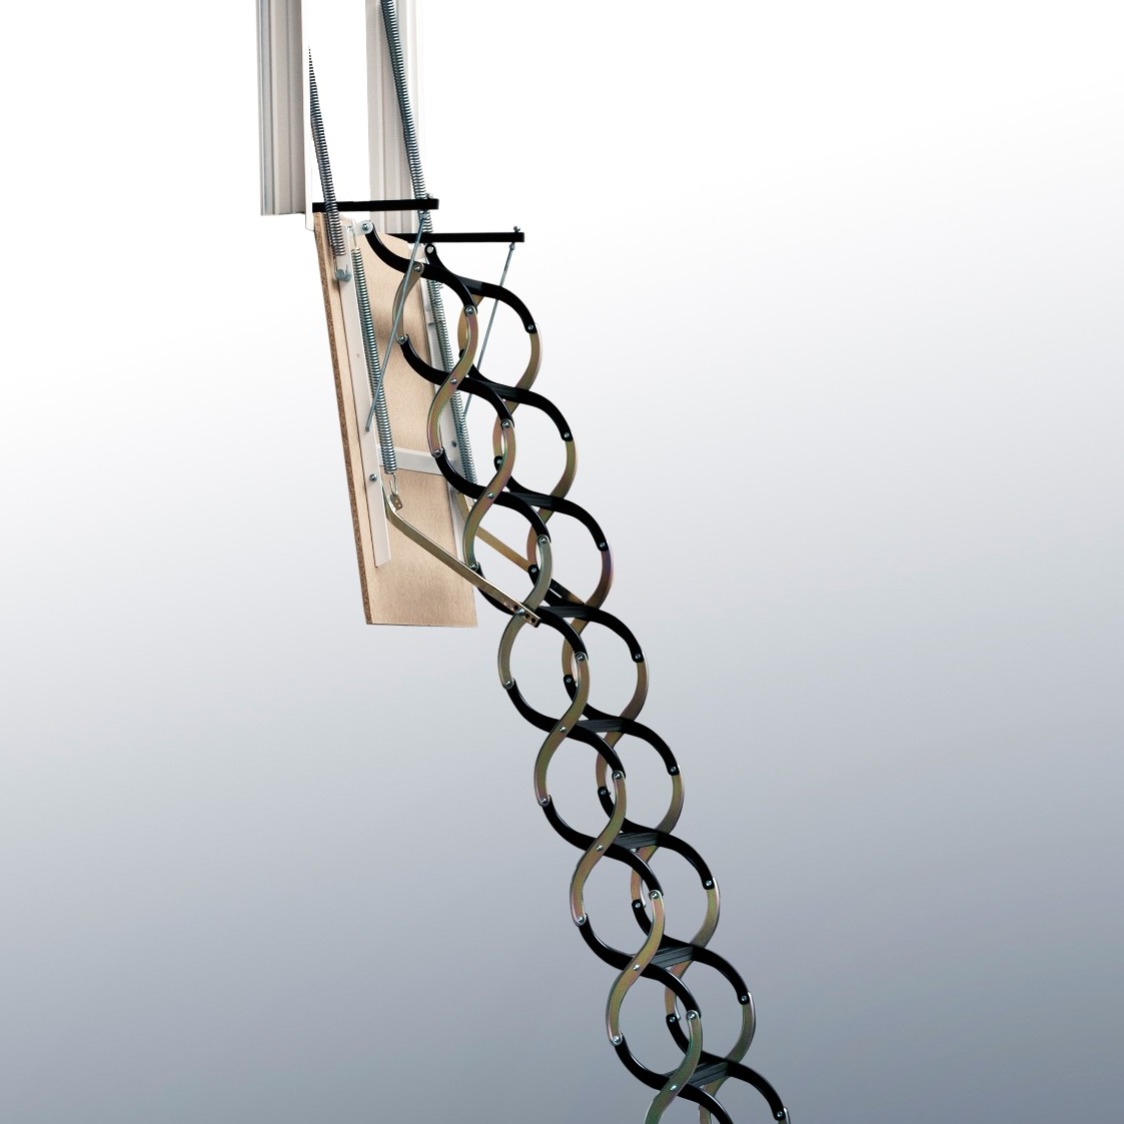 Industrial access ladder for wall access in commercial properties